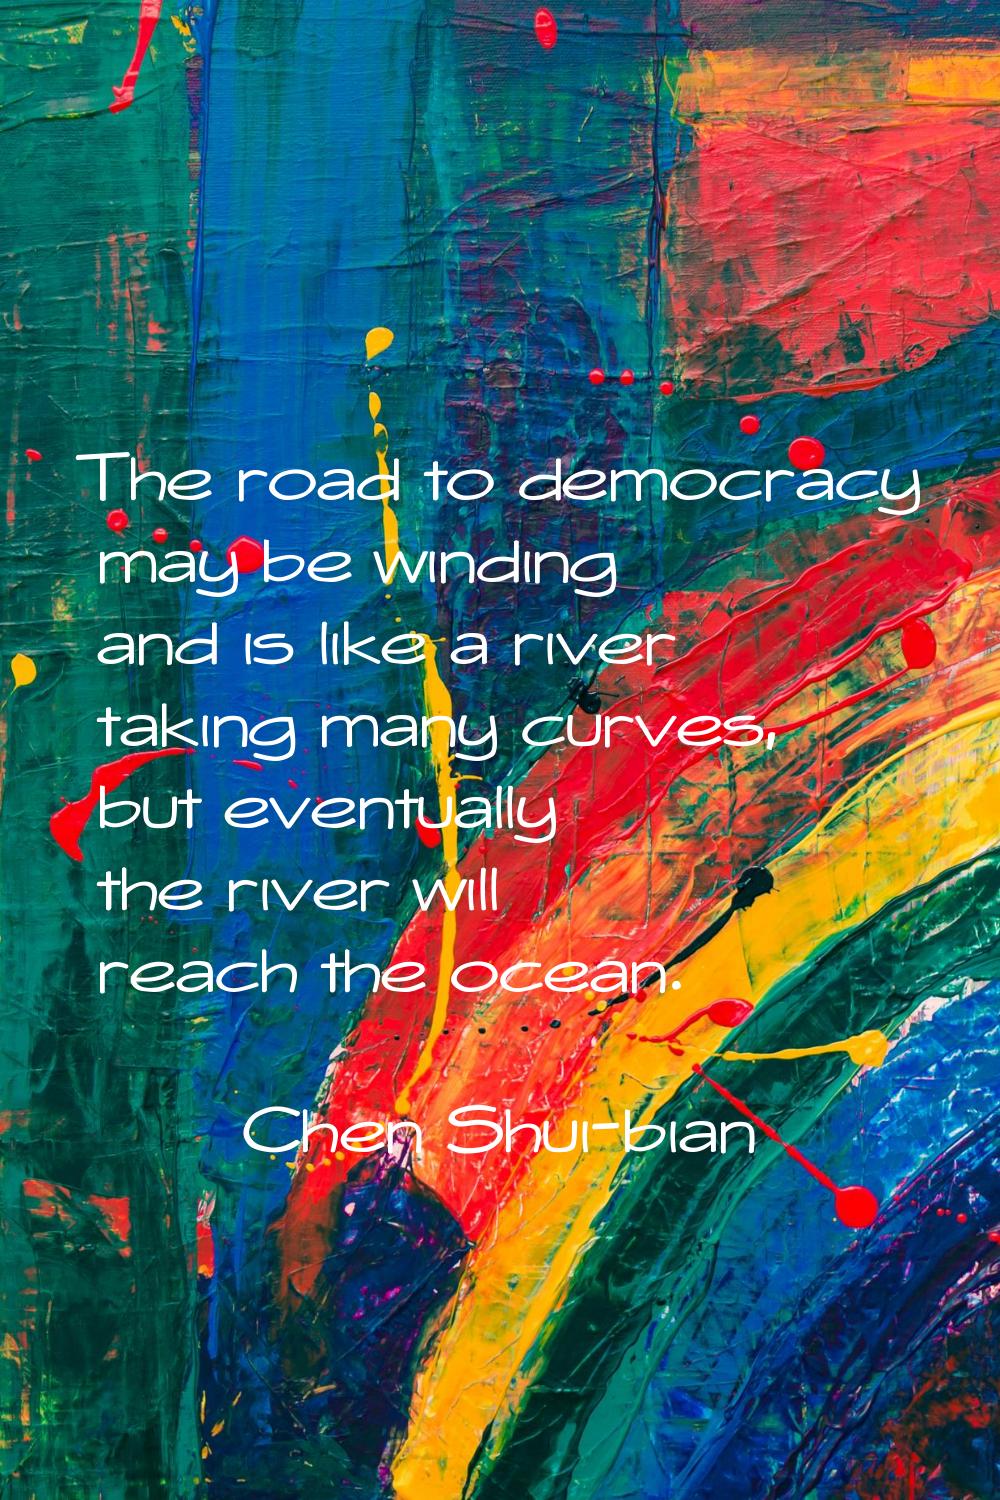 The road to democracy may be winding and is like a river taking many curves, but eventually the riv